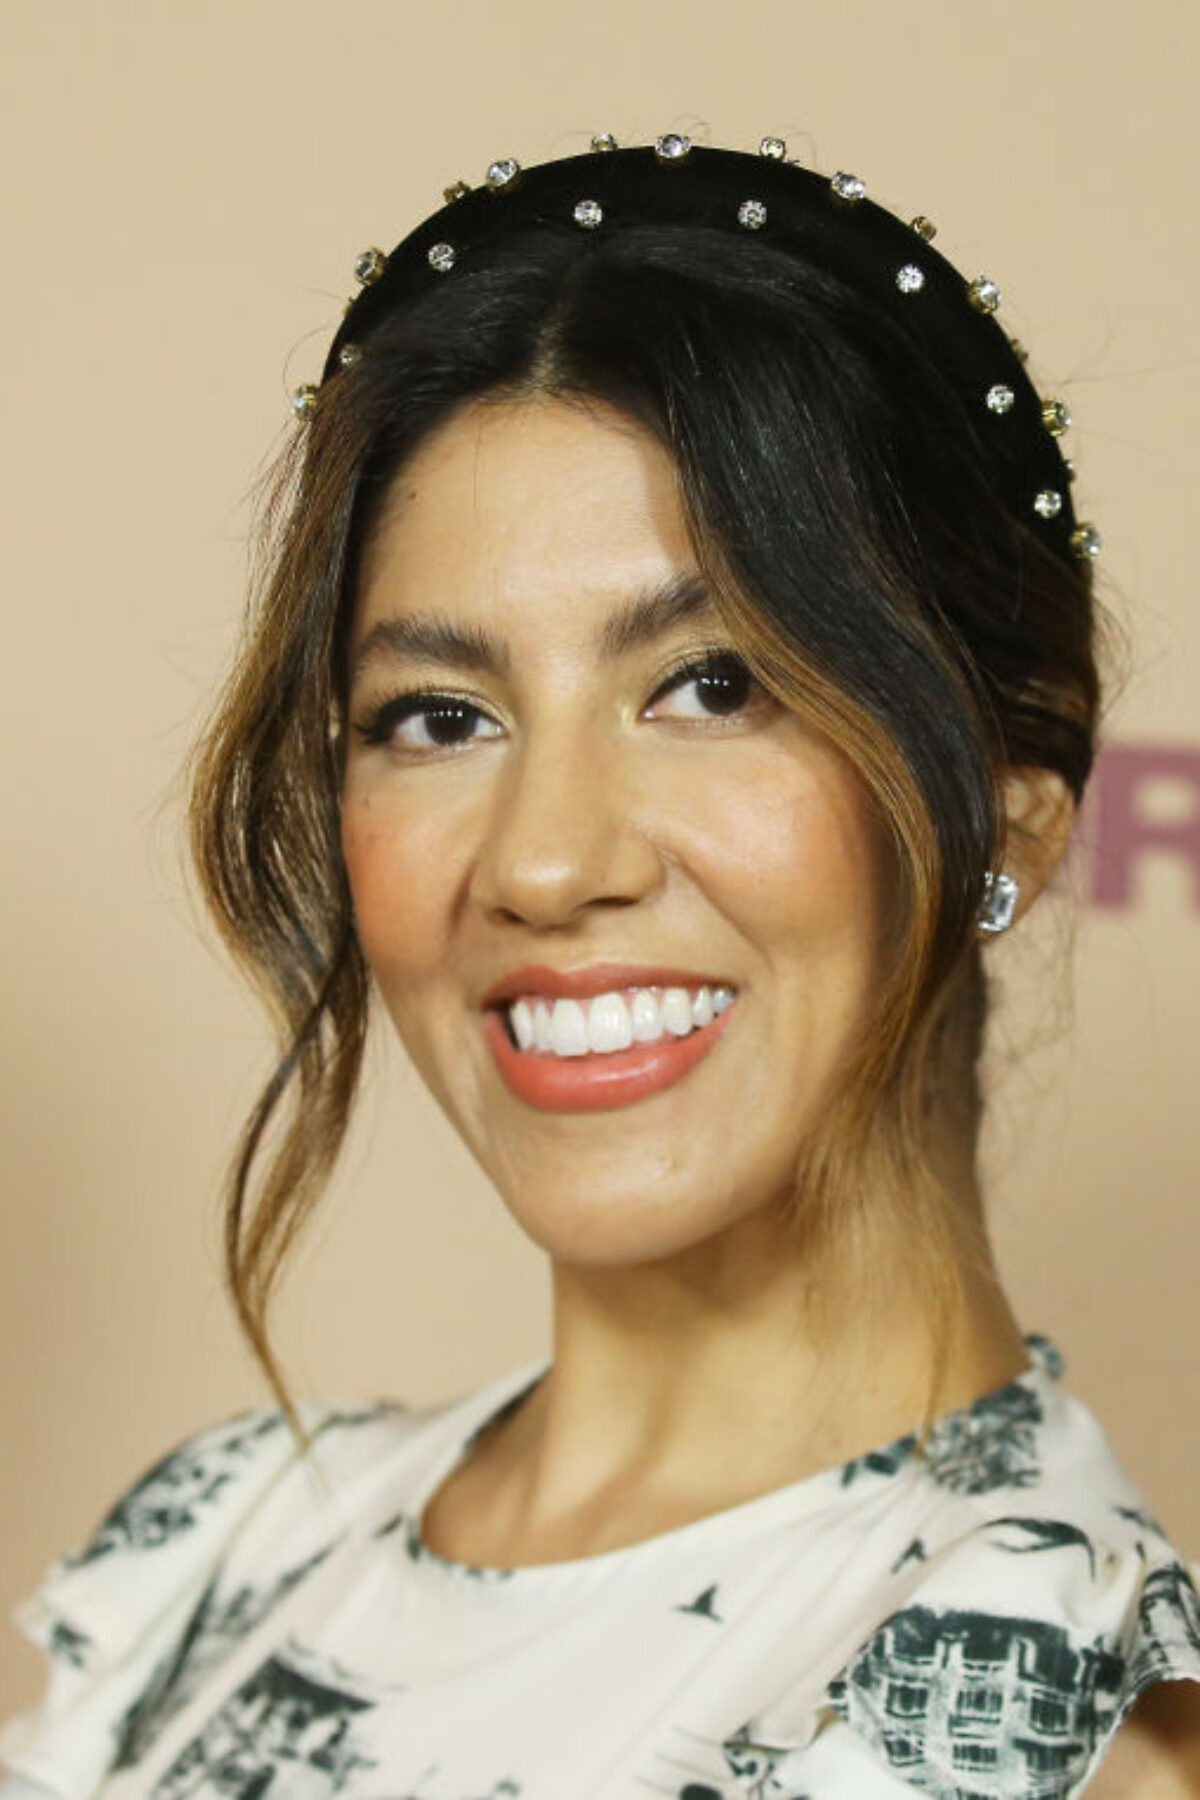 LOS ANGELES, CALIFORNIA - FEBRUARY 18: Stephanie Beatriz attends the Los Angeles premiere of Focus Features' 